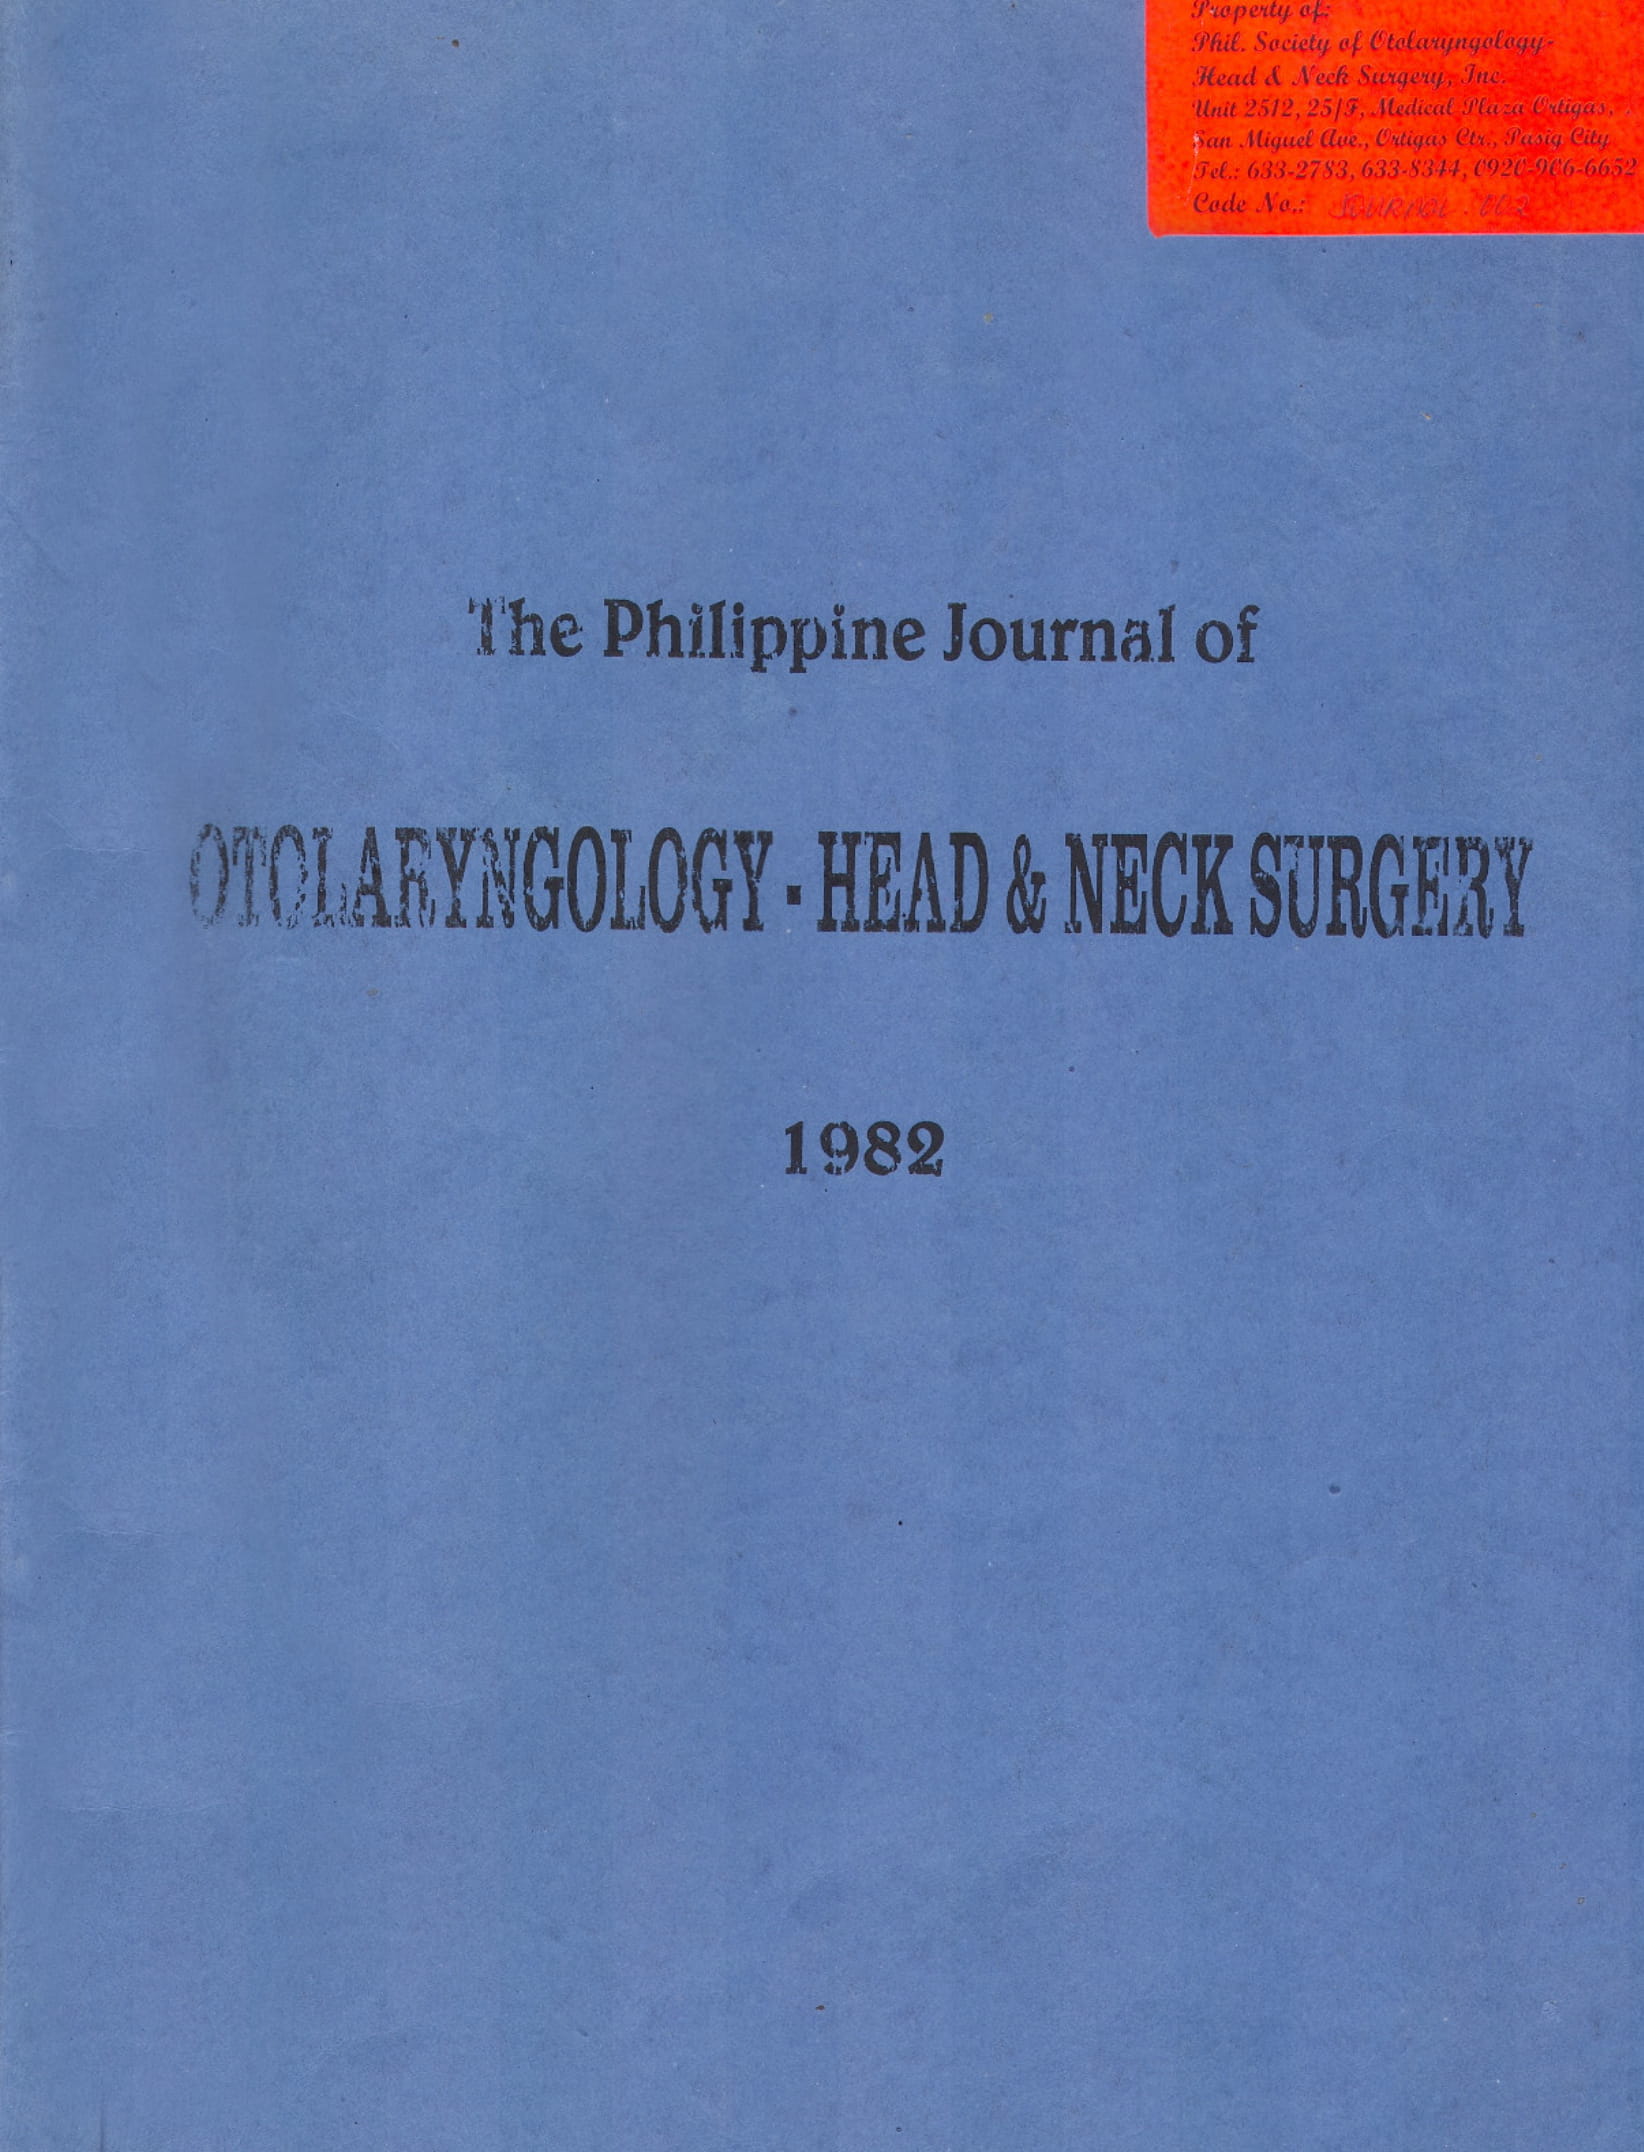 					View 1982: Philippine Journal of Otolaryngology-Head and Neck Surgery
				